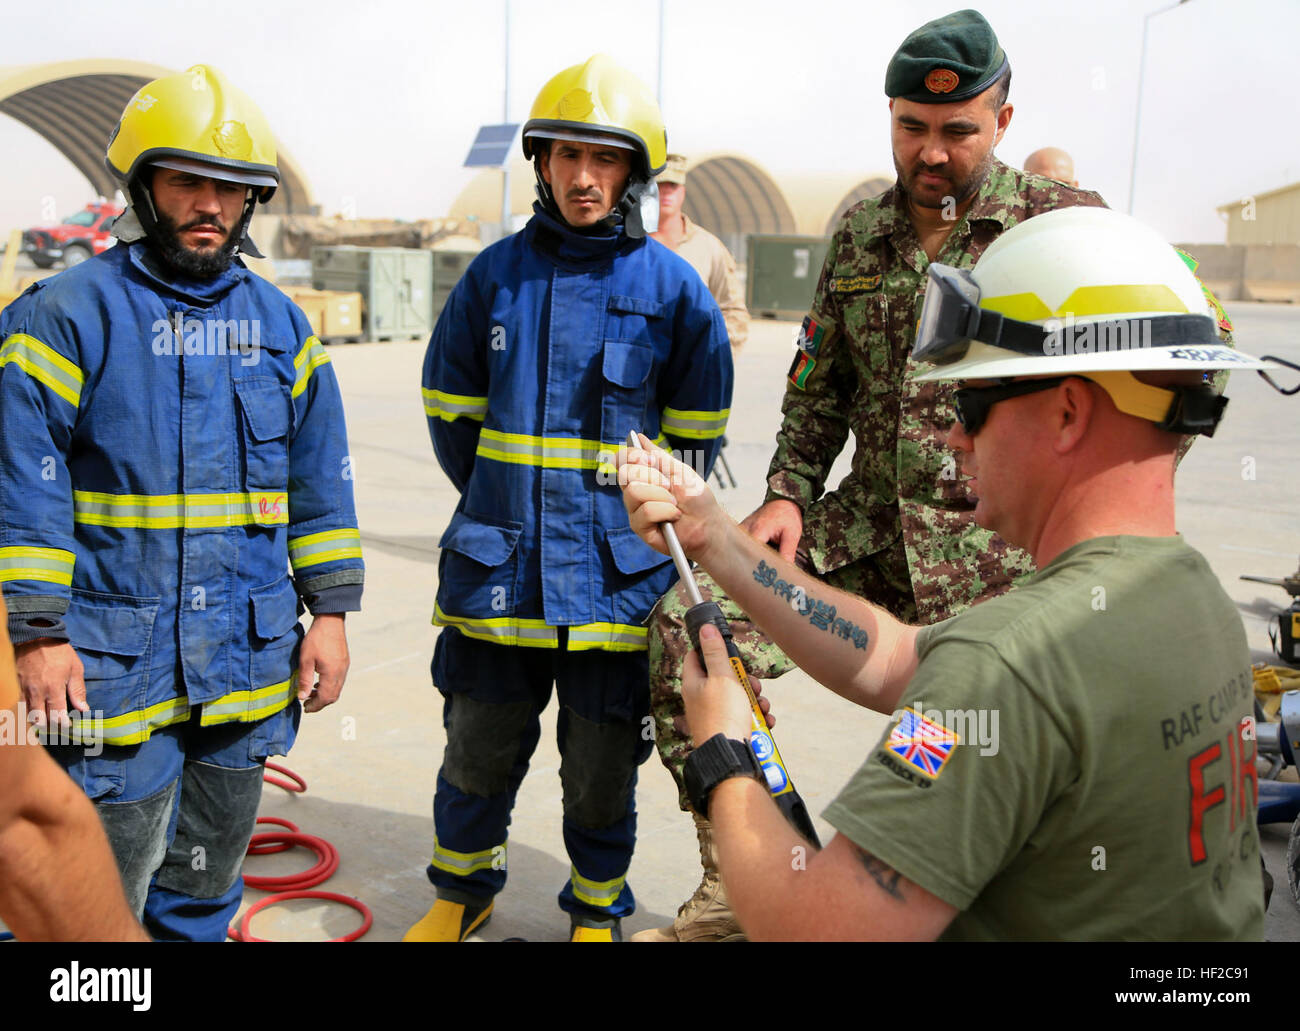 Staff Sgt. Brock H. Sinclair, aircraft rescue and firefighting section leader with Marine Wing Support Squadron (MWSS) 274, instructs Afghan National Army (ANA) soldiers with 215th Corps, Garrison Support Unit, on the correct procedures of inflating and deflating rubber air jacks, part of the F550 fire truck aboard Camp Bastion, Helmand province, Afghanistan, on Aug. 2, 2014. The Marines and ANA conducted the training to increase proficiency as coalition forces redeploy. (Official U. S. Marine Corps photo by Sgt. Dustin D. March/Released) ANA soldiers Conduct Fire Training 140802-M-EN264-293 Stock Photo